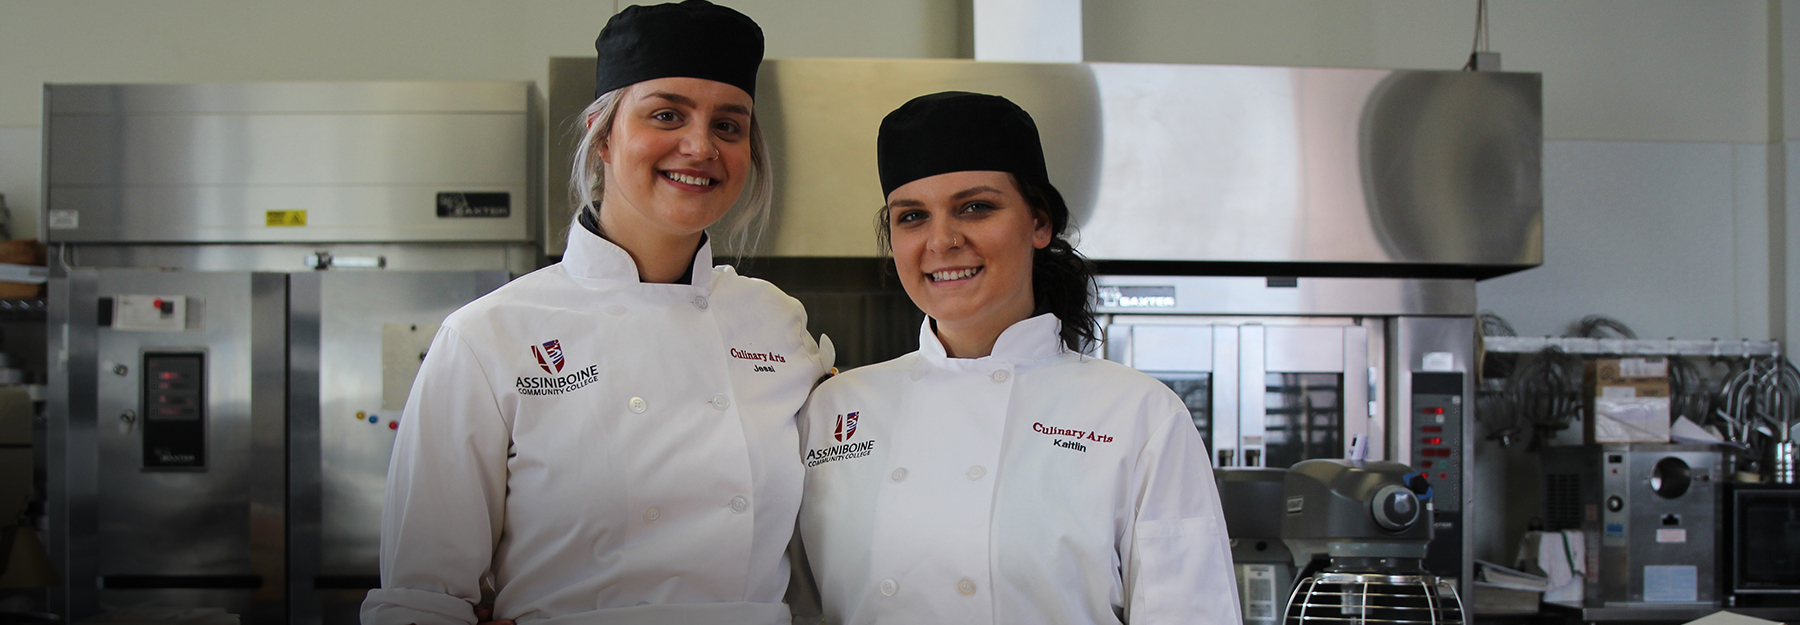 Student and staff spotlight banner featuring two Culinary Arts students.